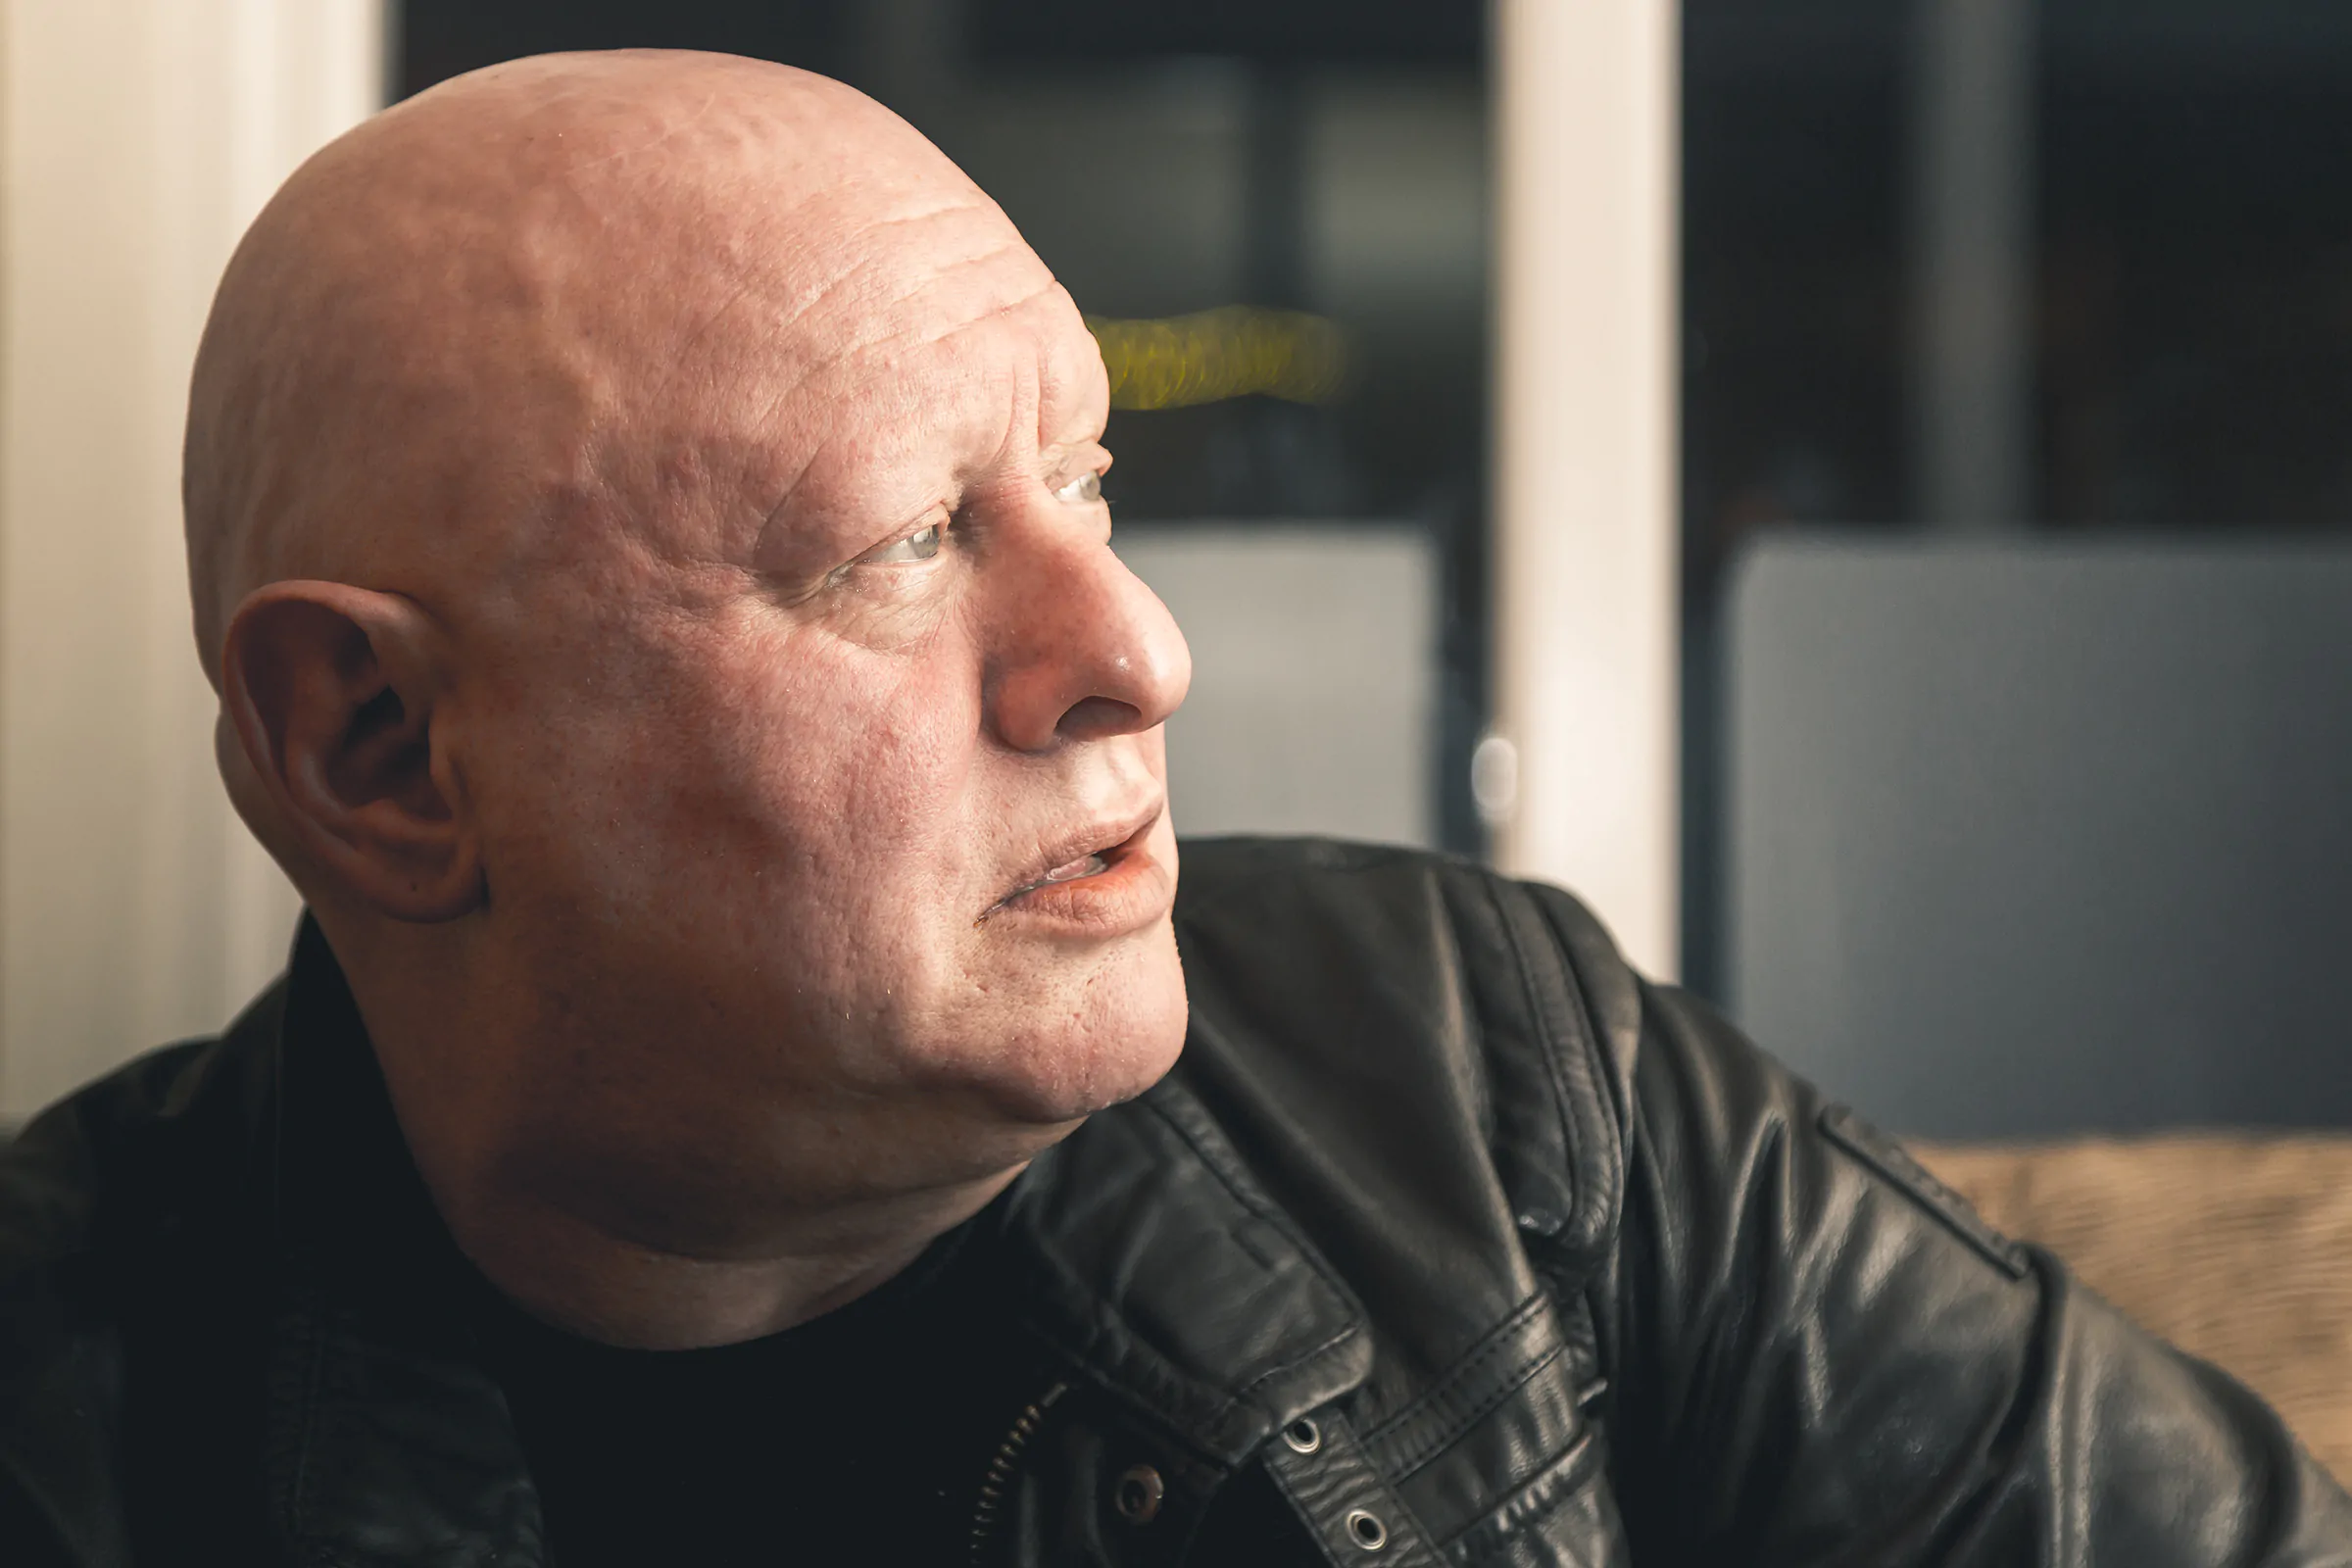 SHAUN RYDER announces new solo album ‘Visits From Future Technology’ – out August 20th